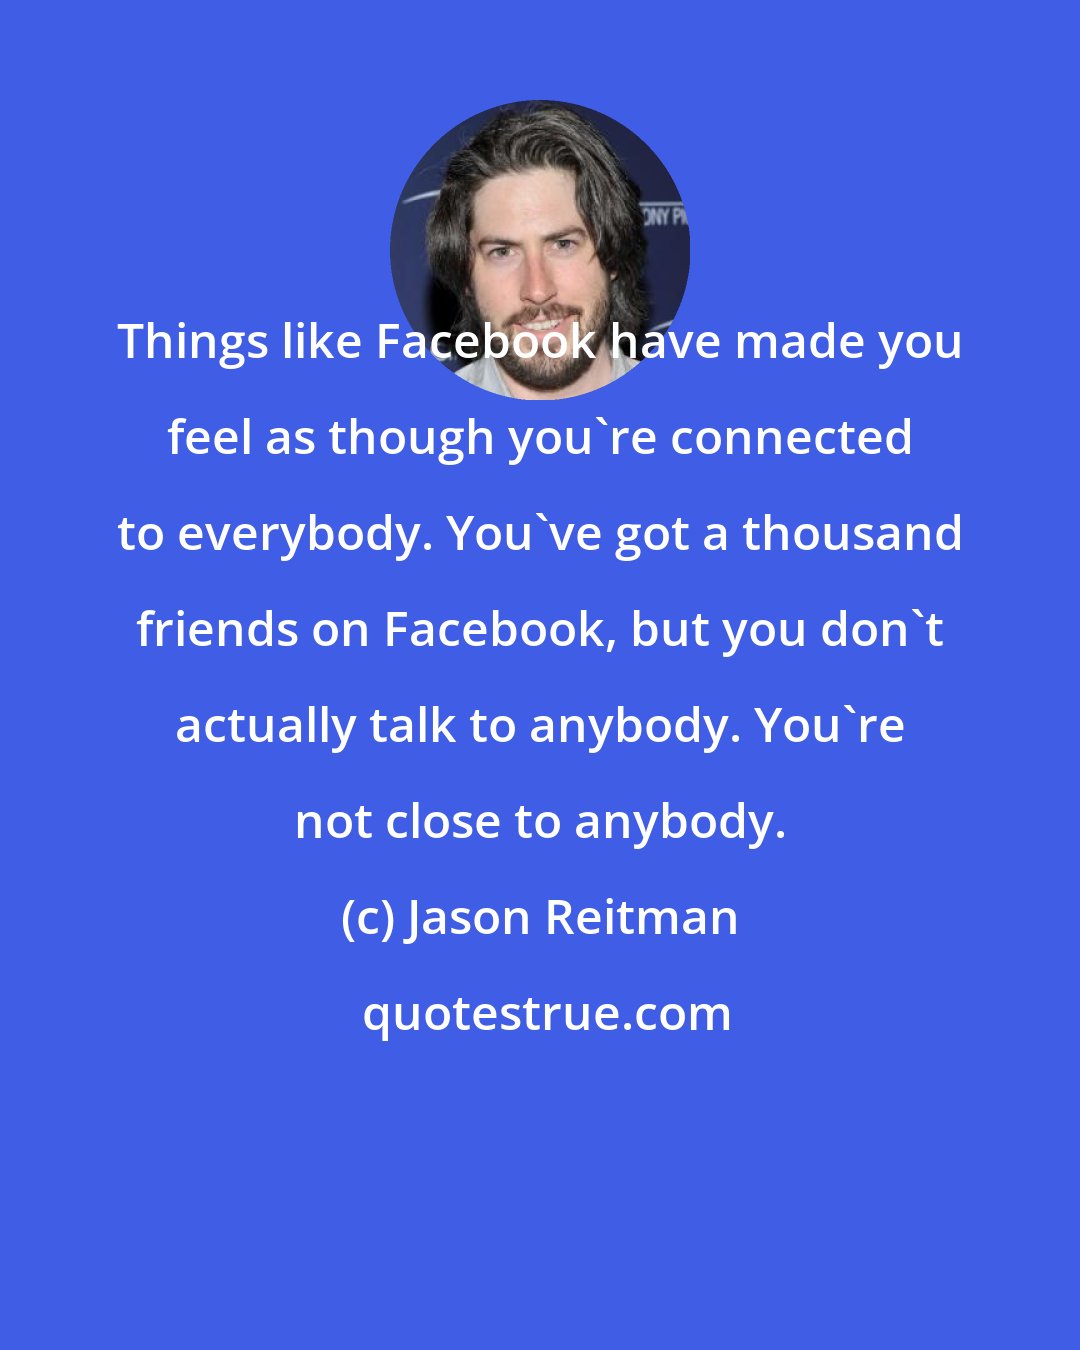 Jason Reitman: Things like Facebook have made you feel as though you're connected to everybody. You've got a thousand friends on Facebook, but you don't actually talk to anybody. You're not close to anybody.